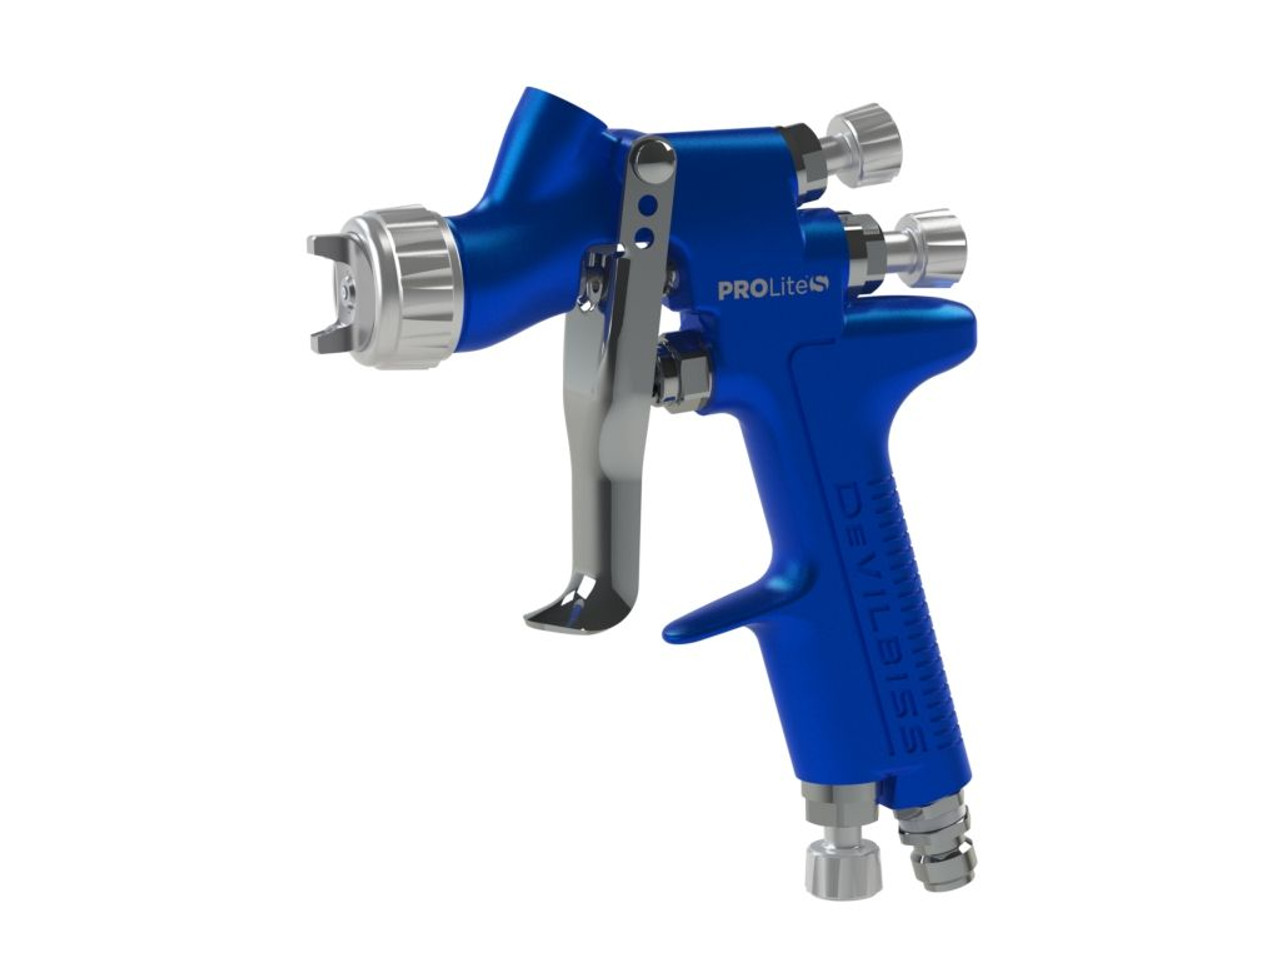 DevilBiss? SRI PRO LITE? 905081 Gravity Feed Spray Gun with Cup, 0.6 mm Nozzle replaces 804262